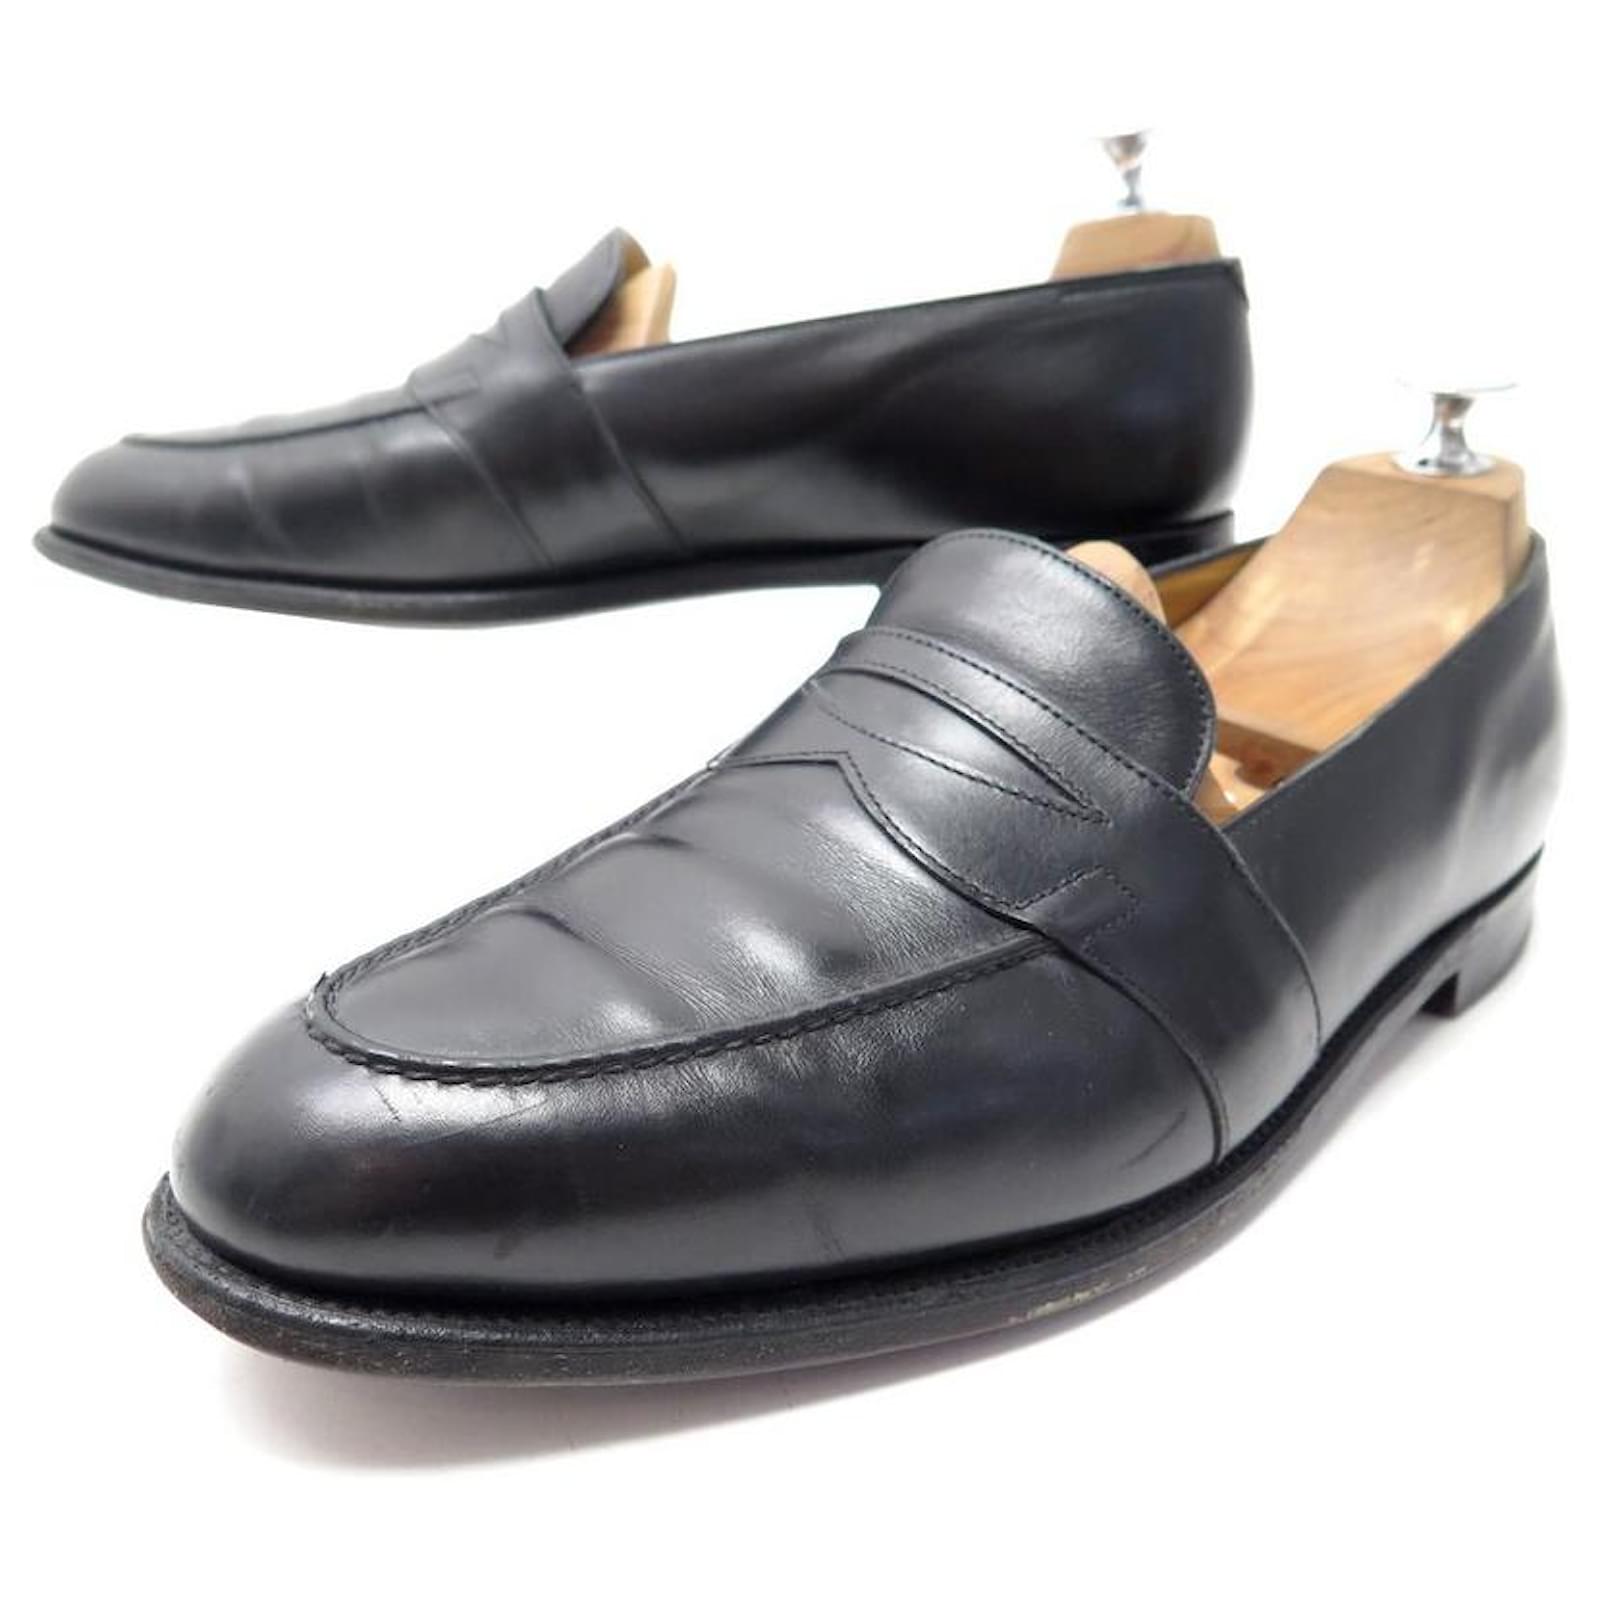 JOHN LOBB FENCOTE SHOES 7.5 41.5 LOAFER SHOES BLACK LEATHER LOAFERS ref ...